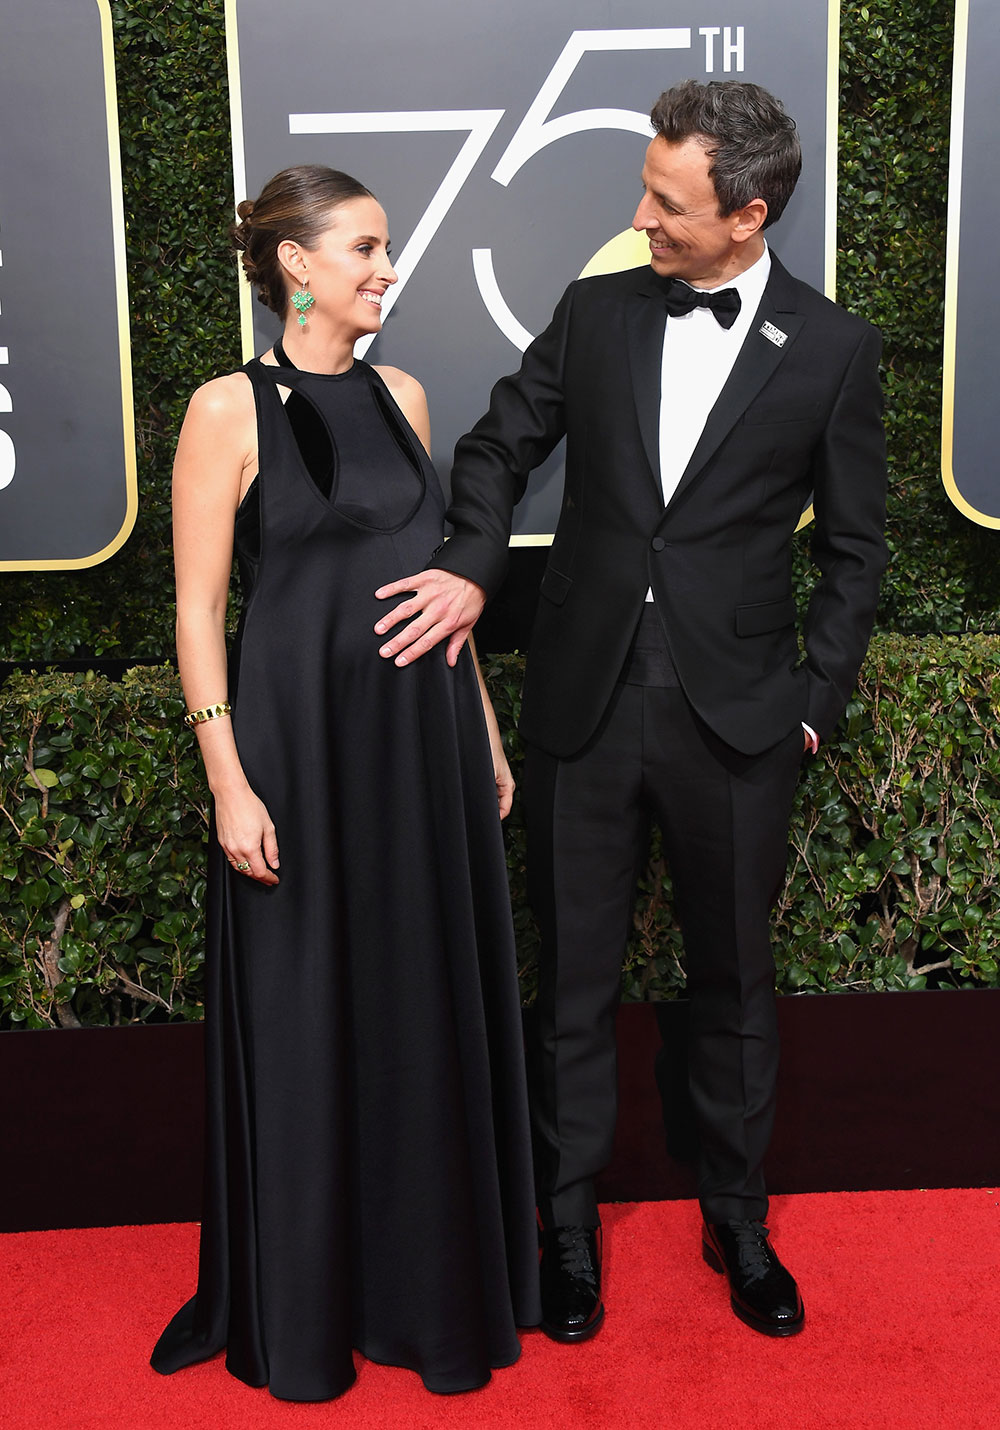 2018 Golden Globes host Seth Meyers and wife Alexi Ashe.